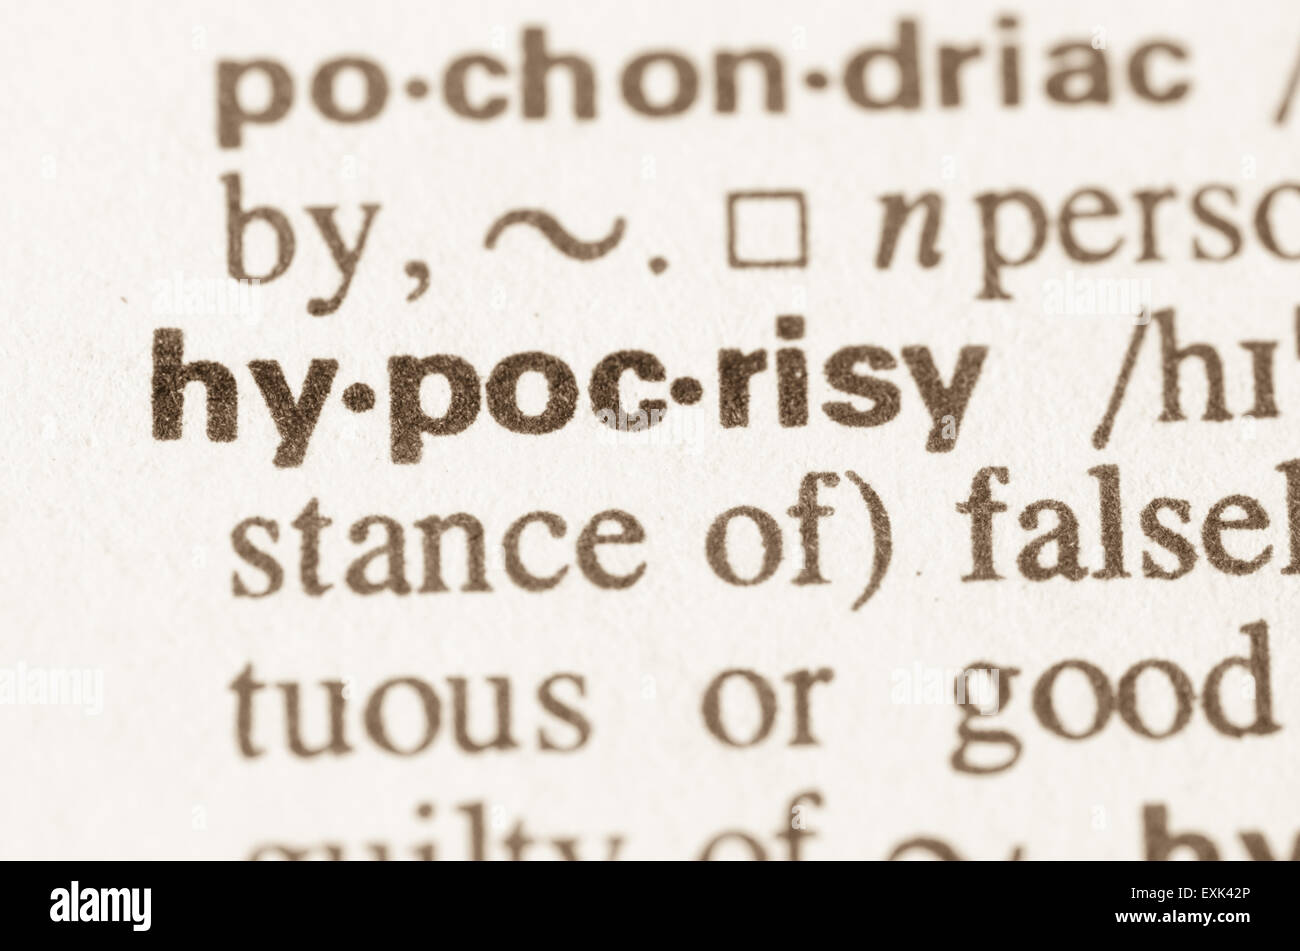 Definition of word hypocrisy in dictionary Stock Photo